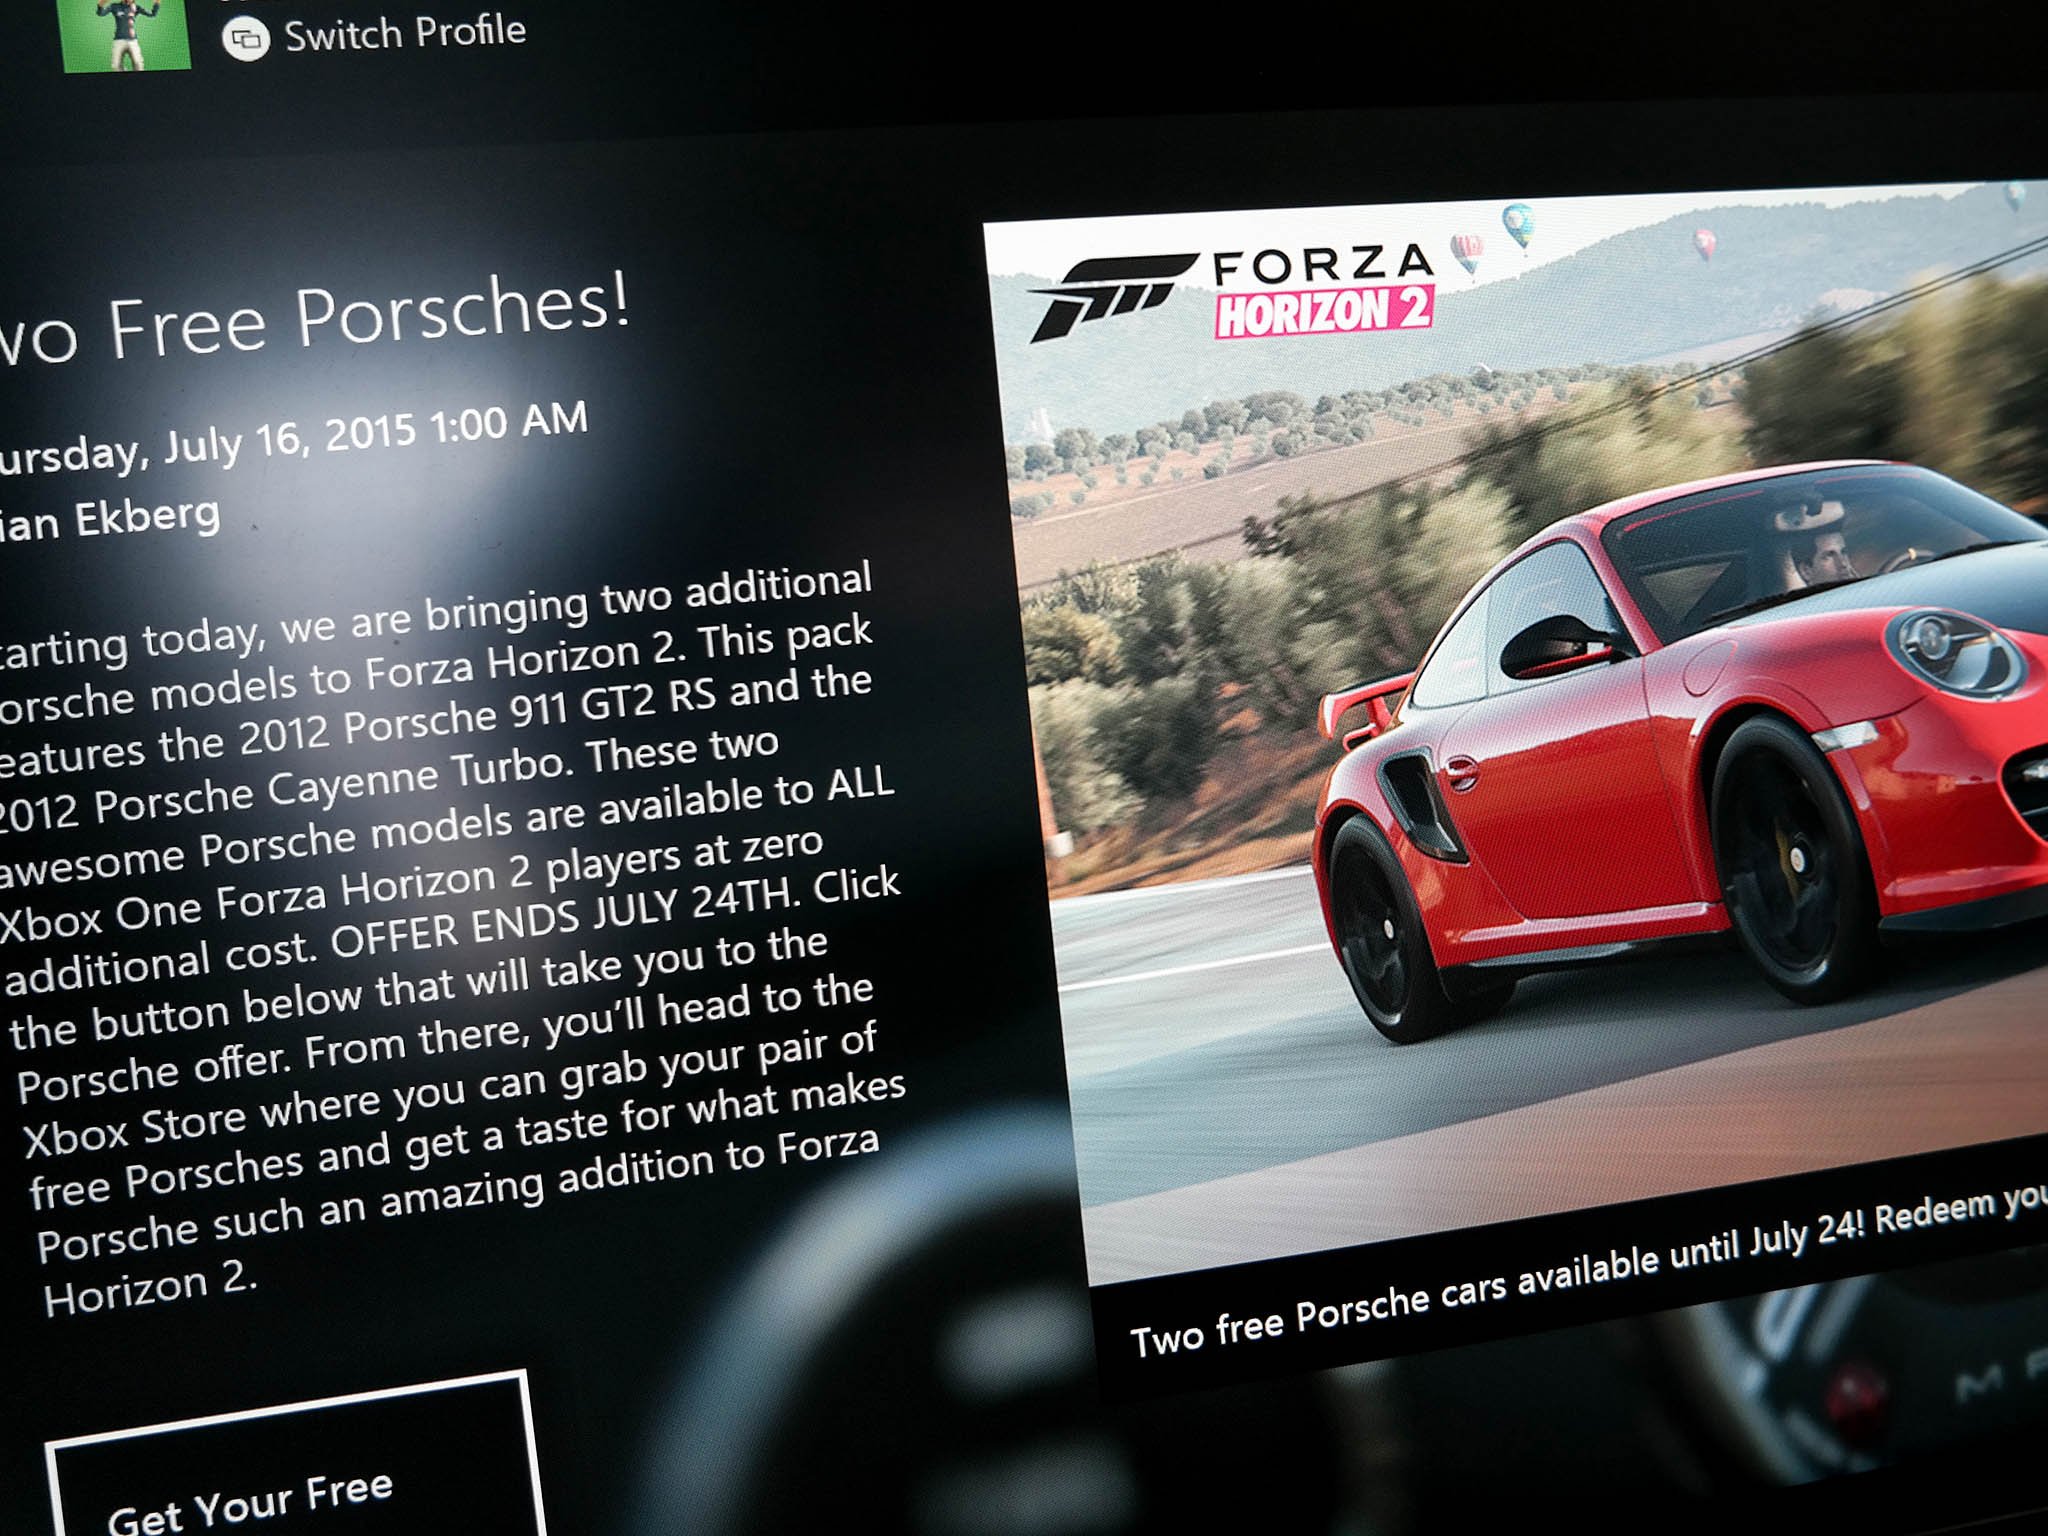 Grab Two Free Cars In Forza Horizon 2 Win The Porsche Expansion Pack With Windows Central Windows Central